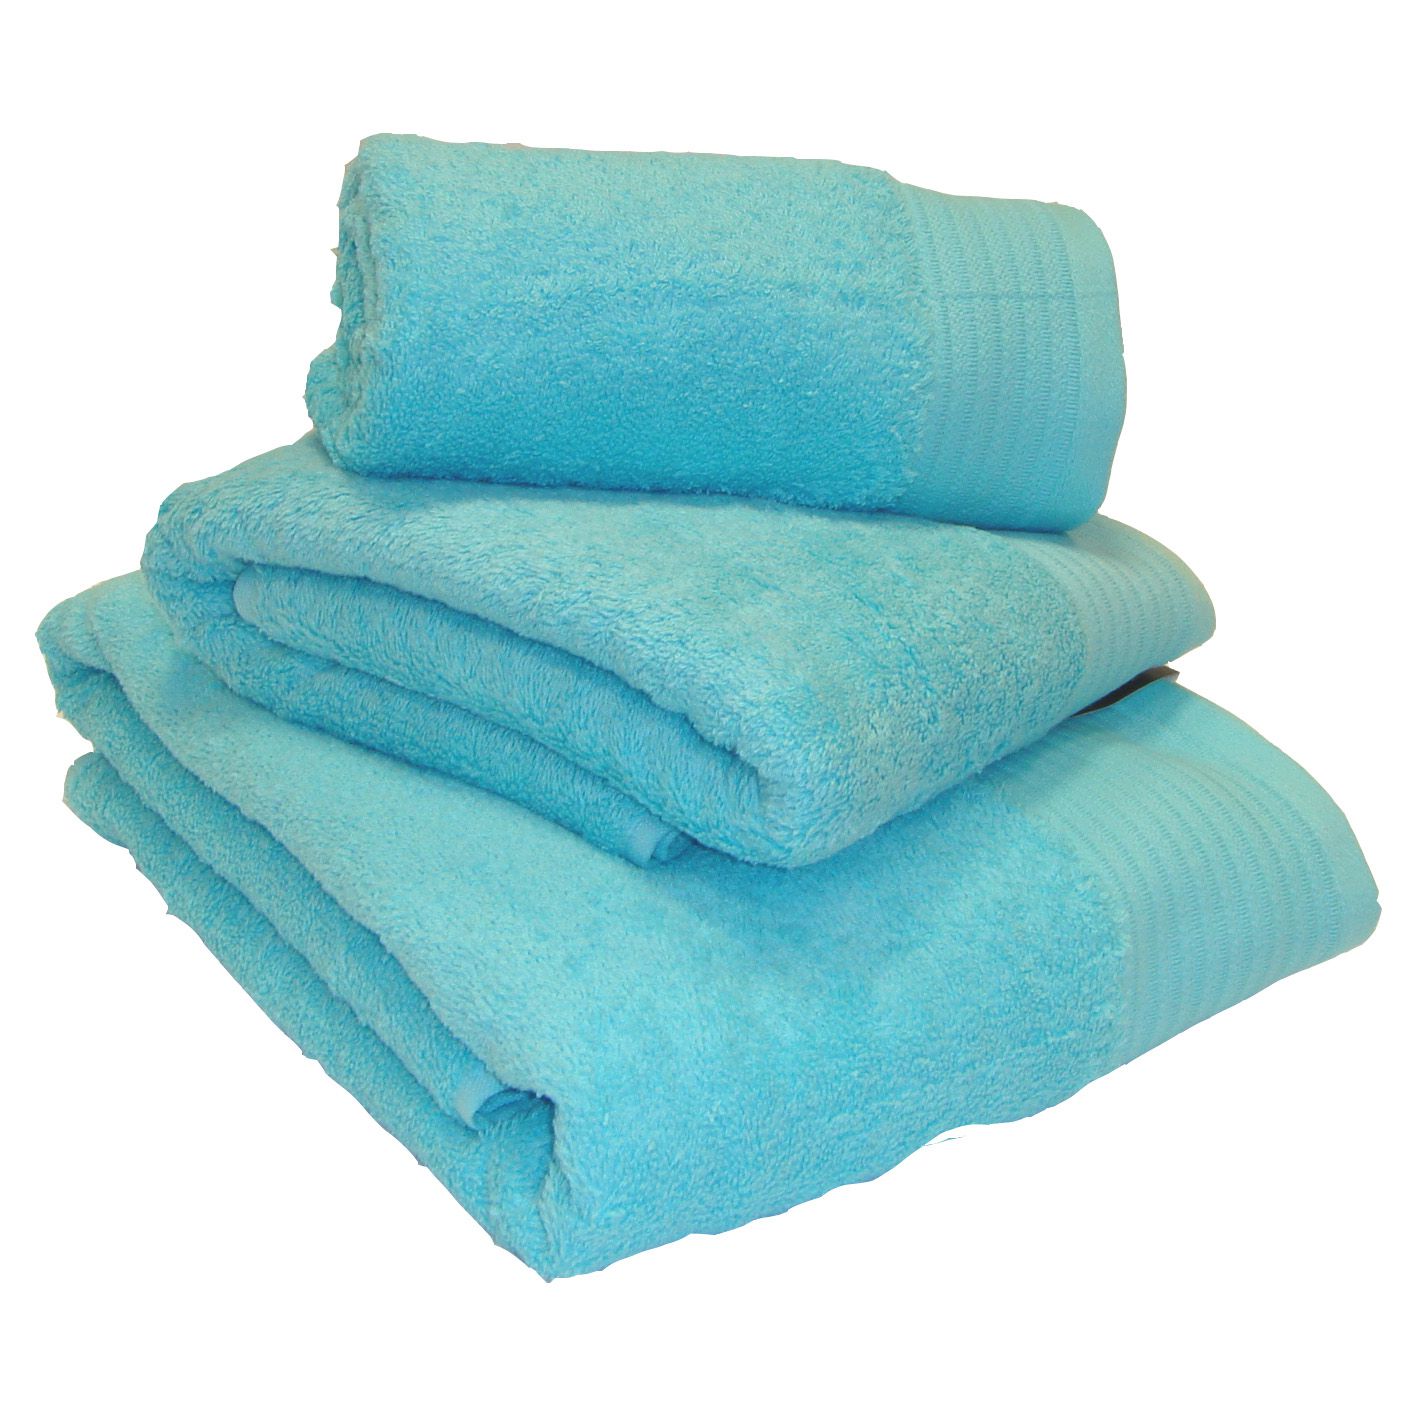 Egyptian Cotton Combed Supersoft Towel - Turquoise: Face Cloth | Spark ...